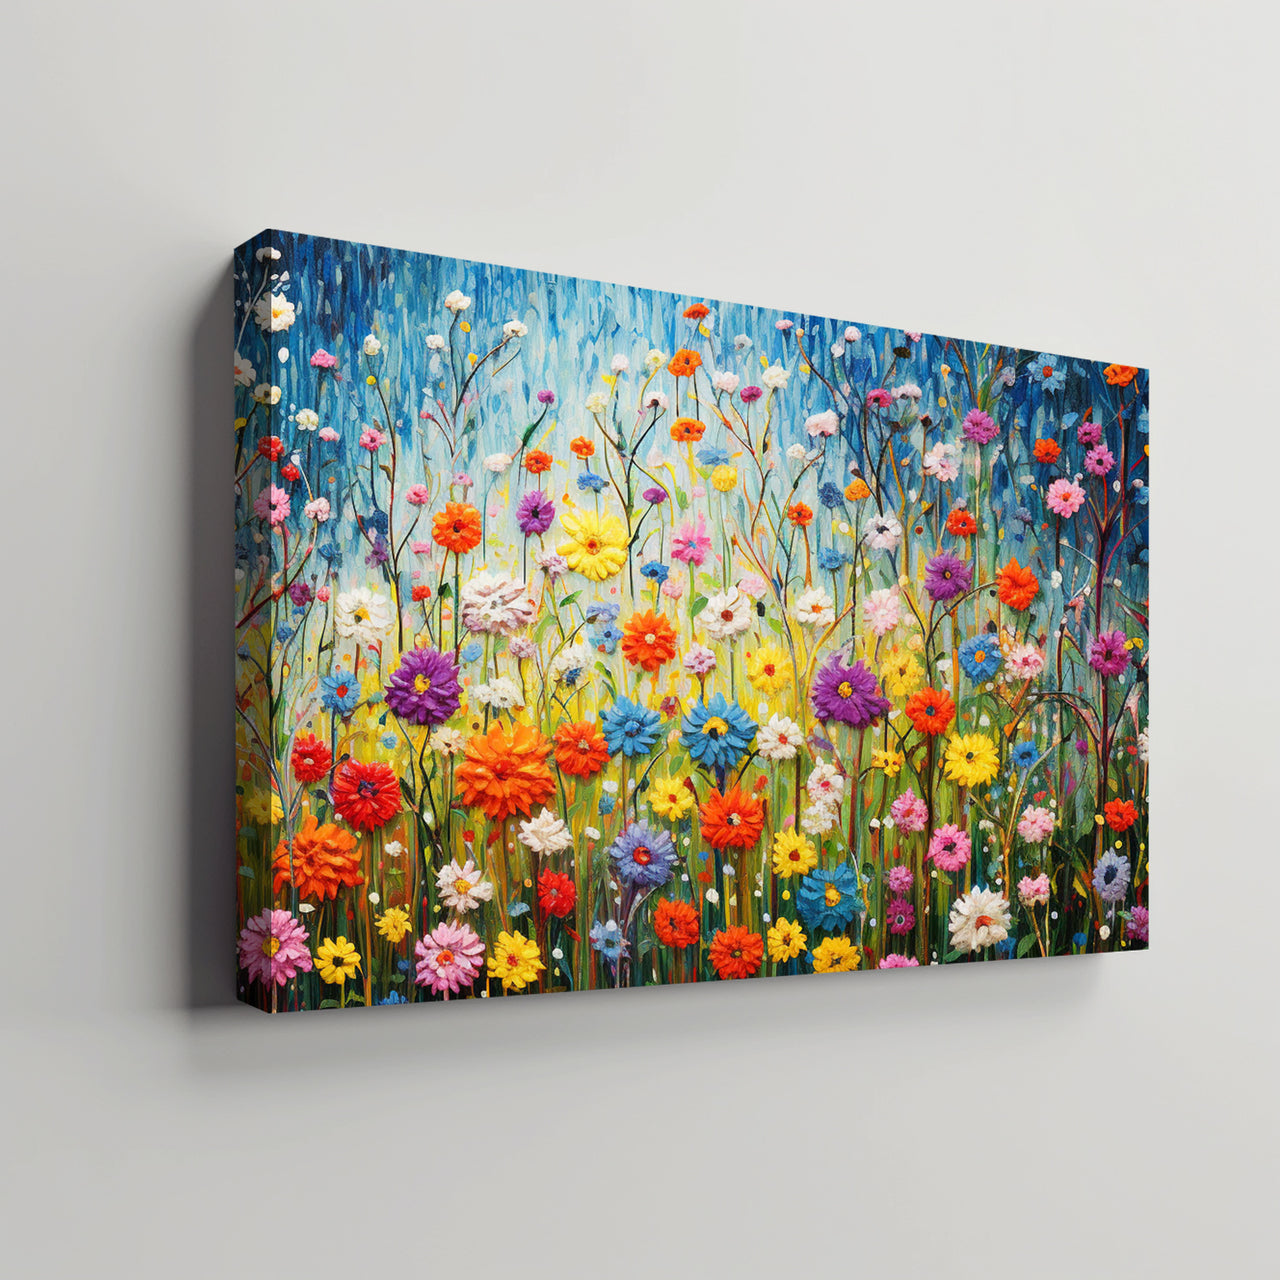 Wildflowers on Canvas, Flowers in Rain 04, Minimalist Flower Wall Art, Abstract Wall Art, Watercolor flowers, Floral Print, Classic, Rustic Farmhouse, Wildflower Home Decor, Flower Painting Canvas, Floral Wall Art